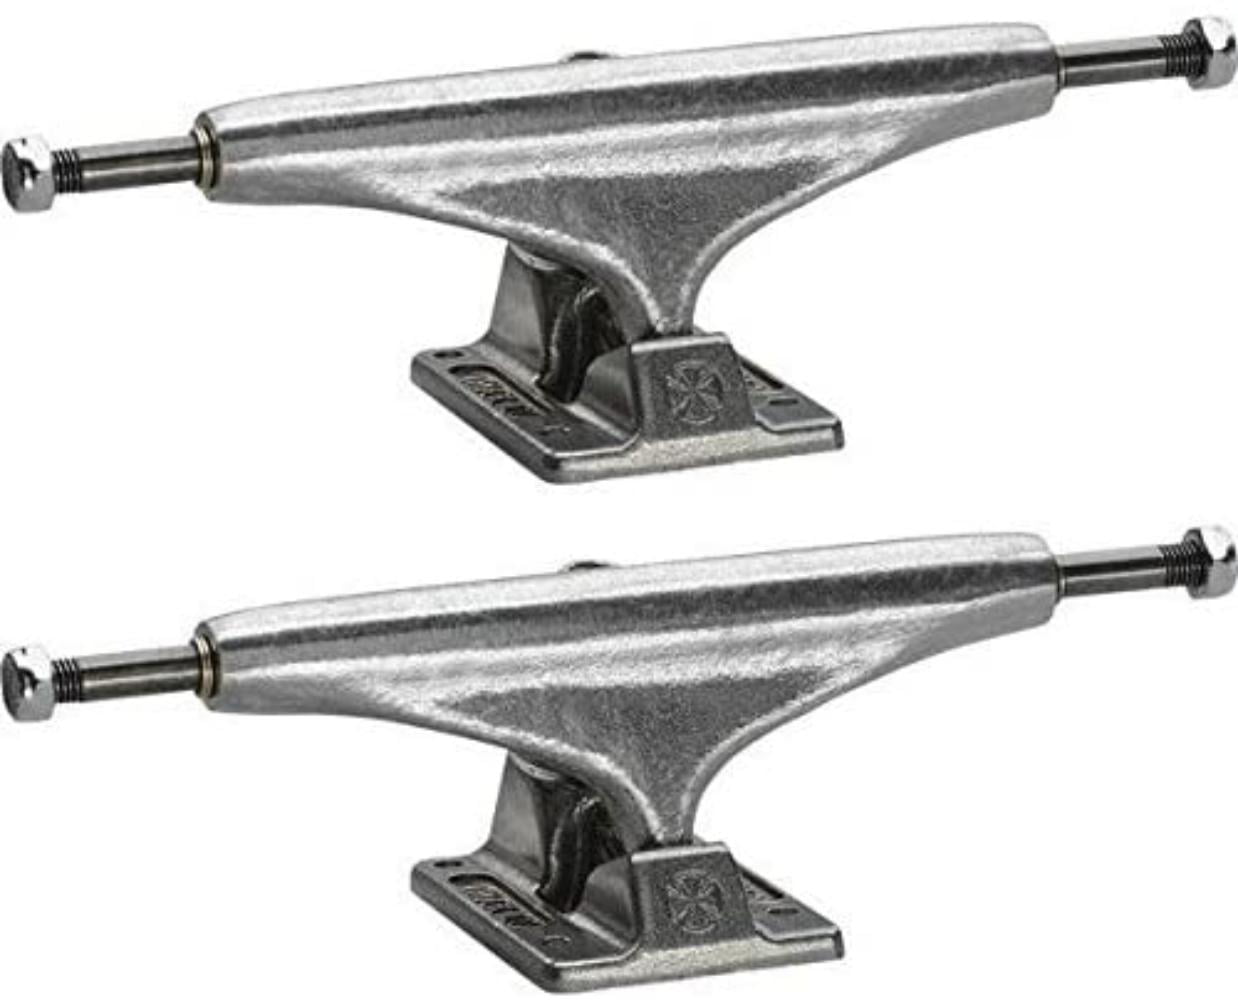 Set of 2 INDEPENDENT Stage 11 Skateboard Trucks Raw 159's 8.75"  Wide Axles 